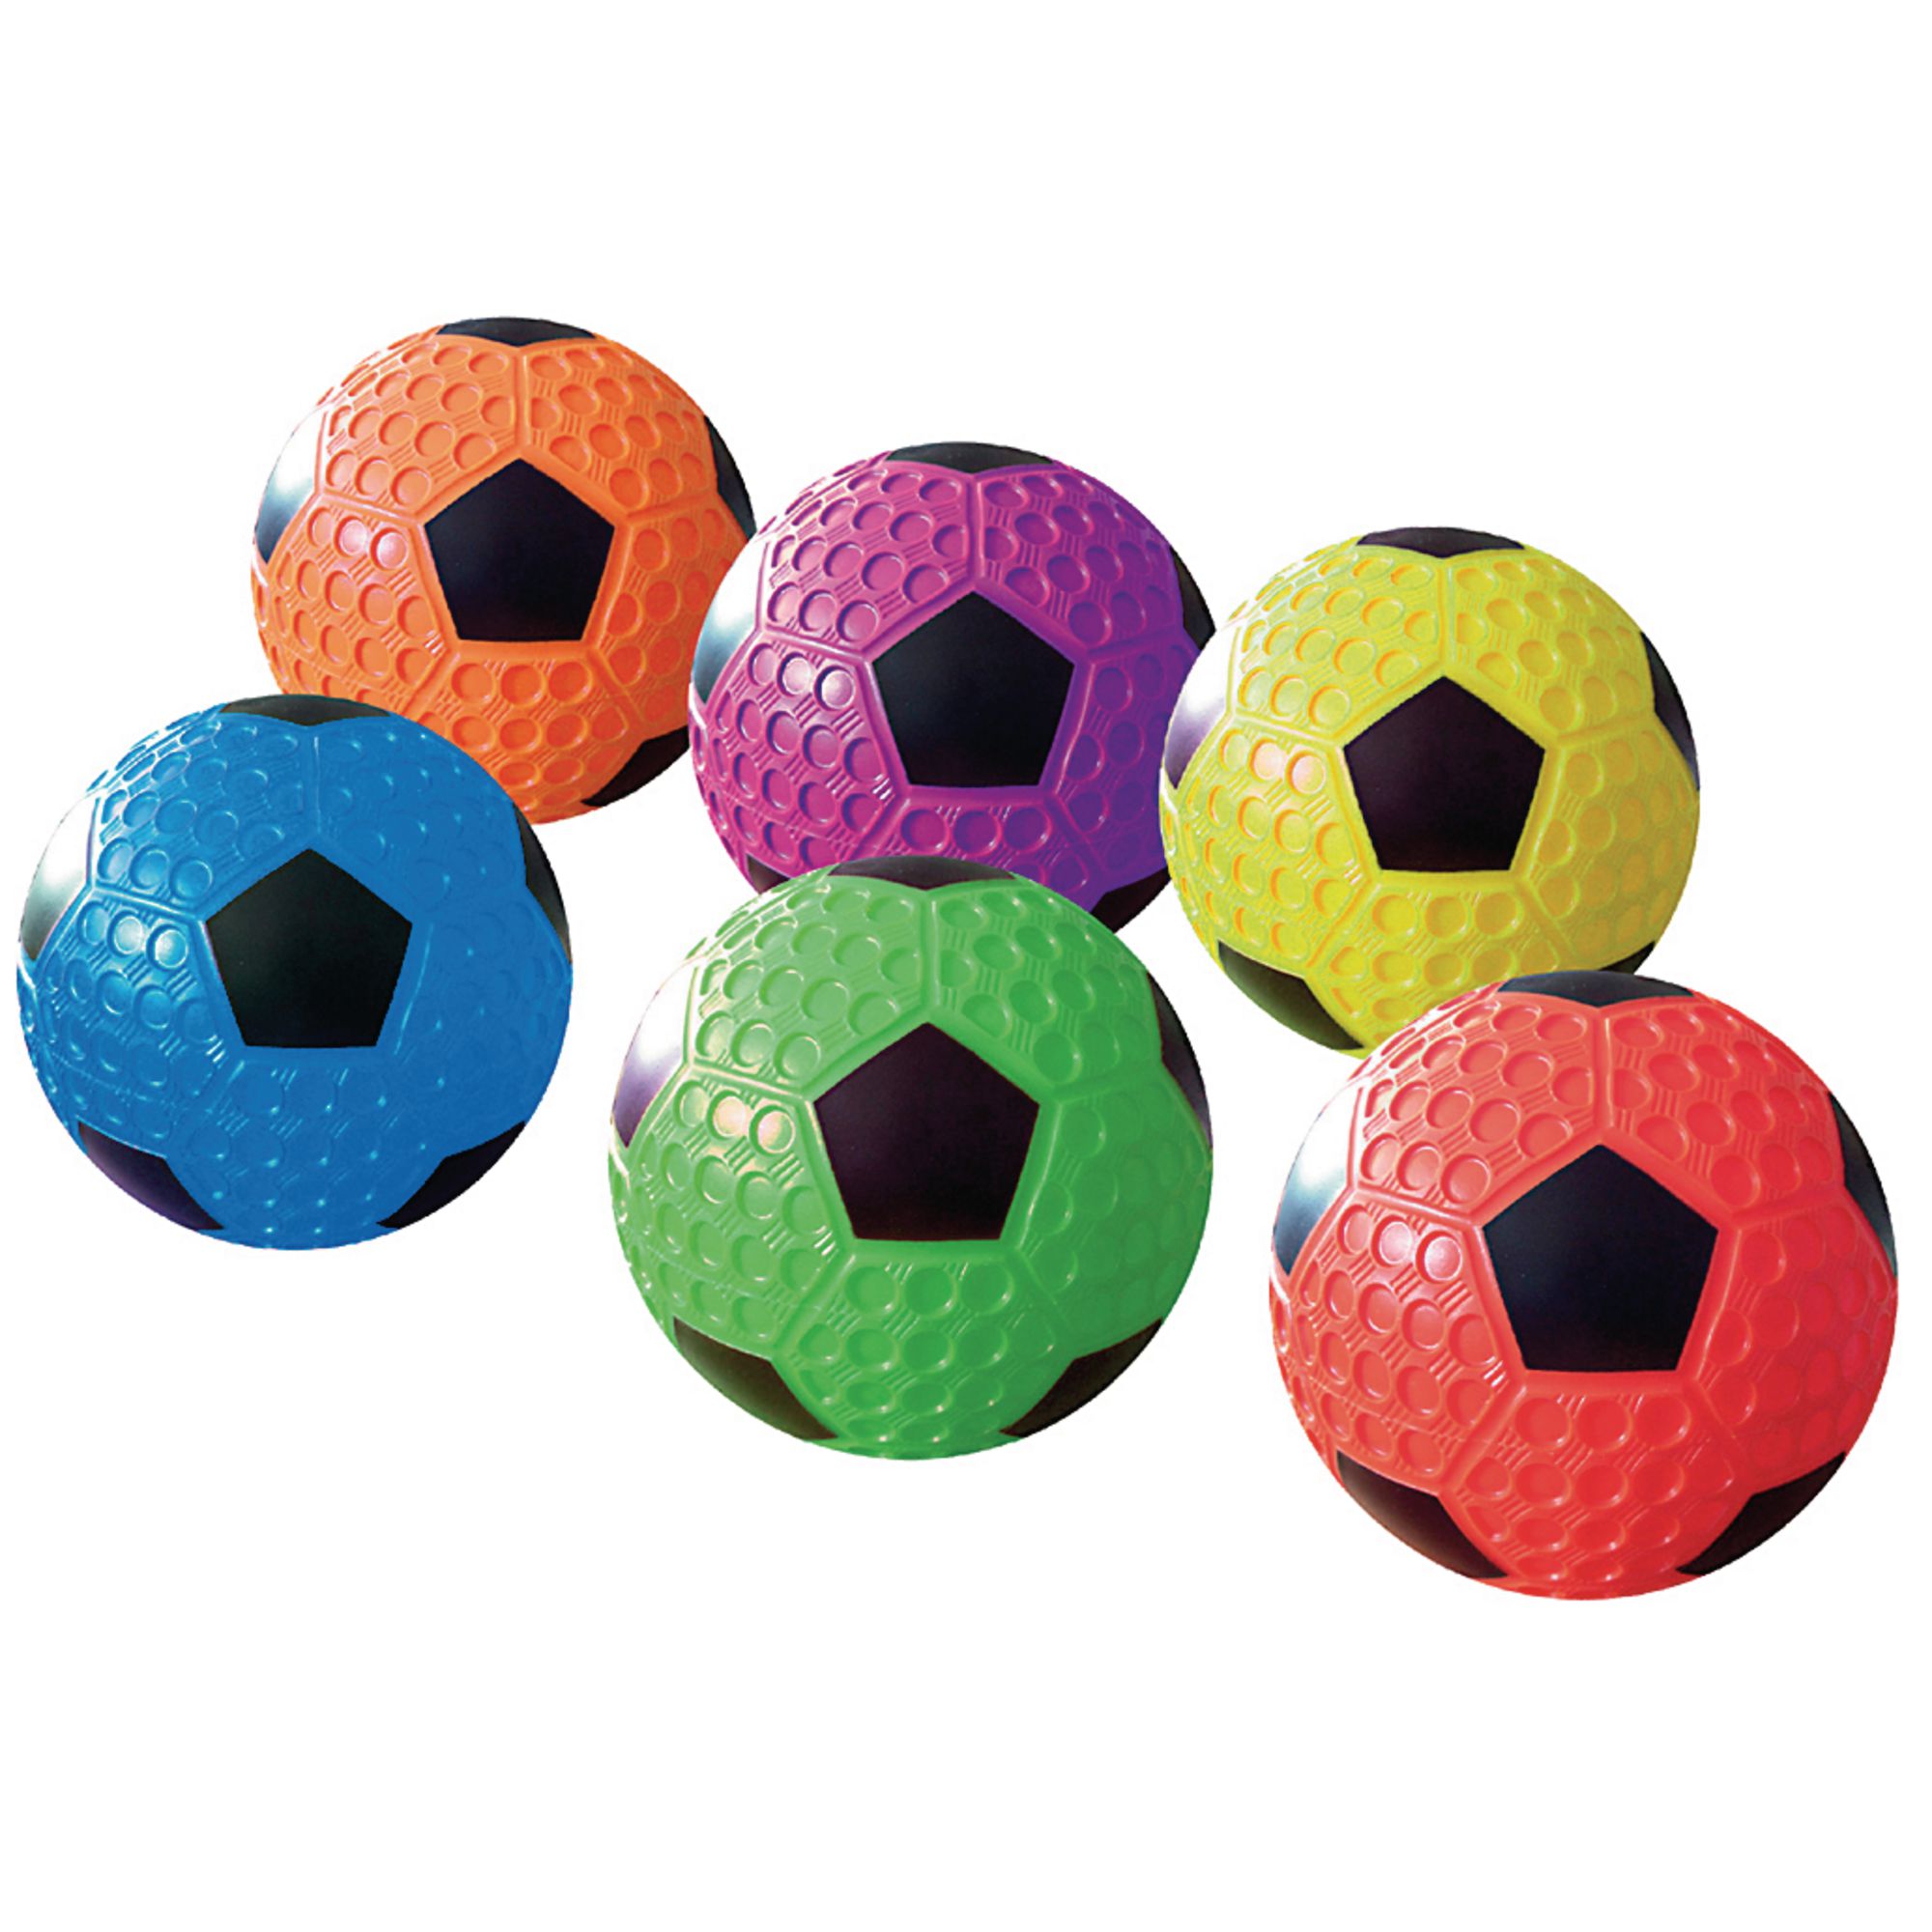 Dimple Soccer Ball Pack